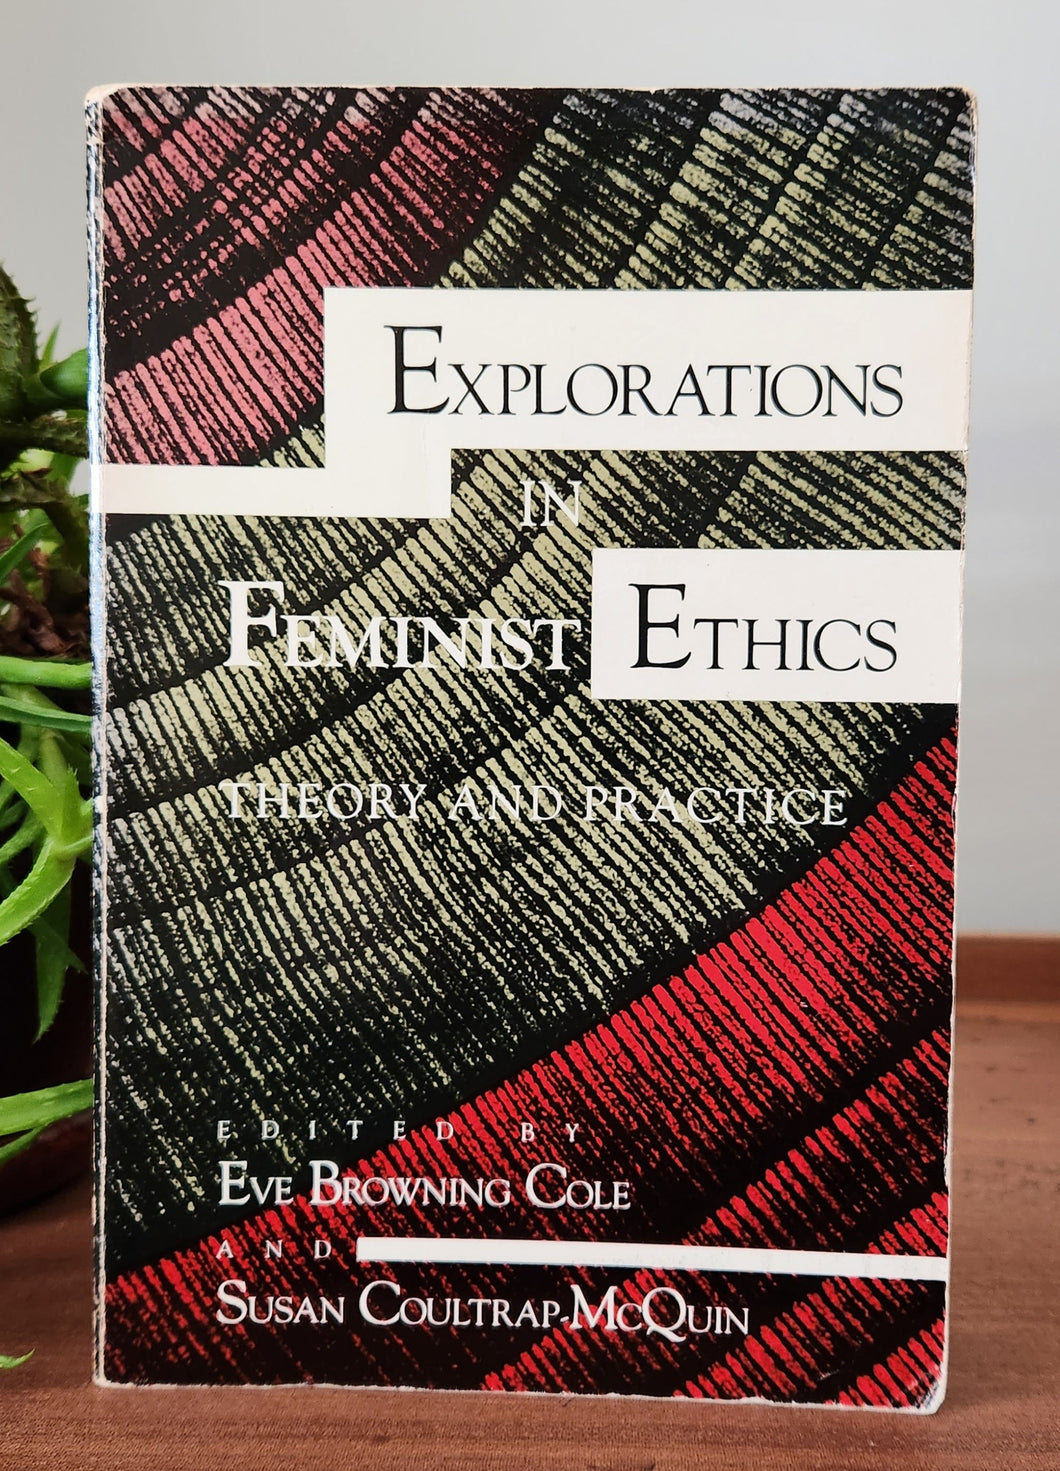 Explorations in Feminist Ethics: Theory and Practice (A Midland Book) by Eve Browning Cole, Susan C. McQuin